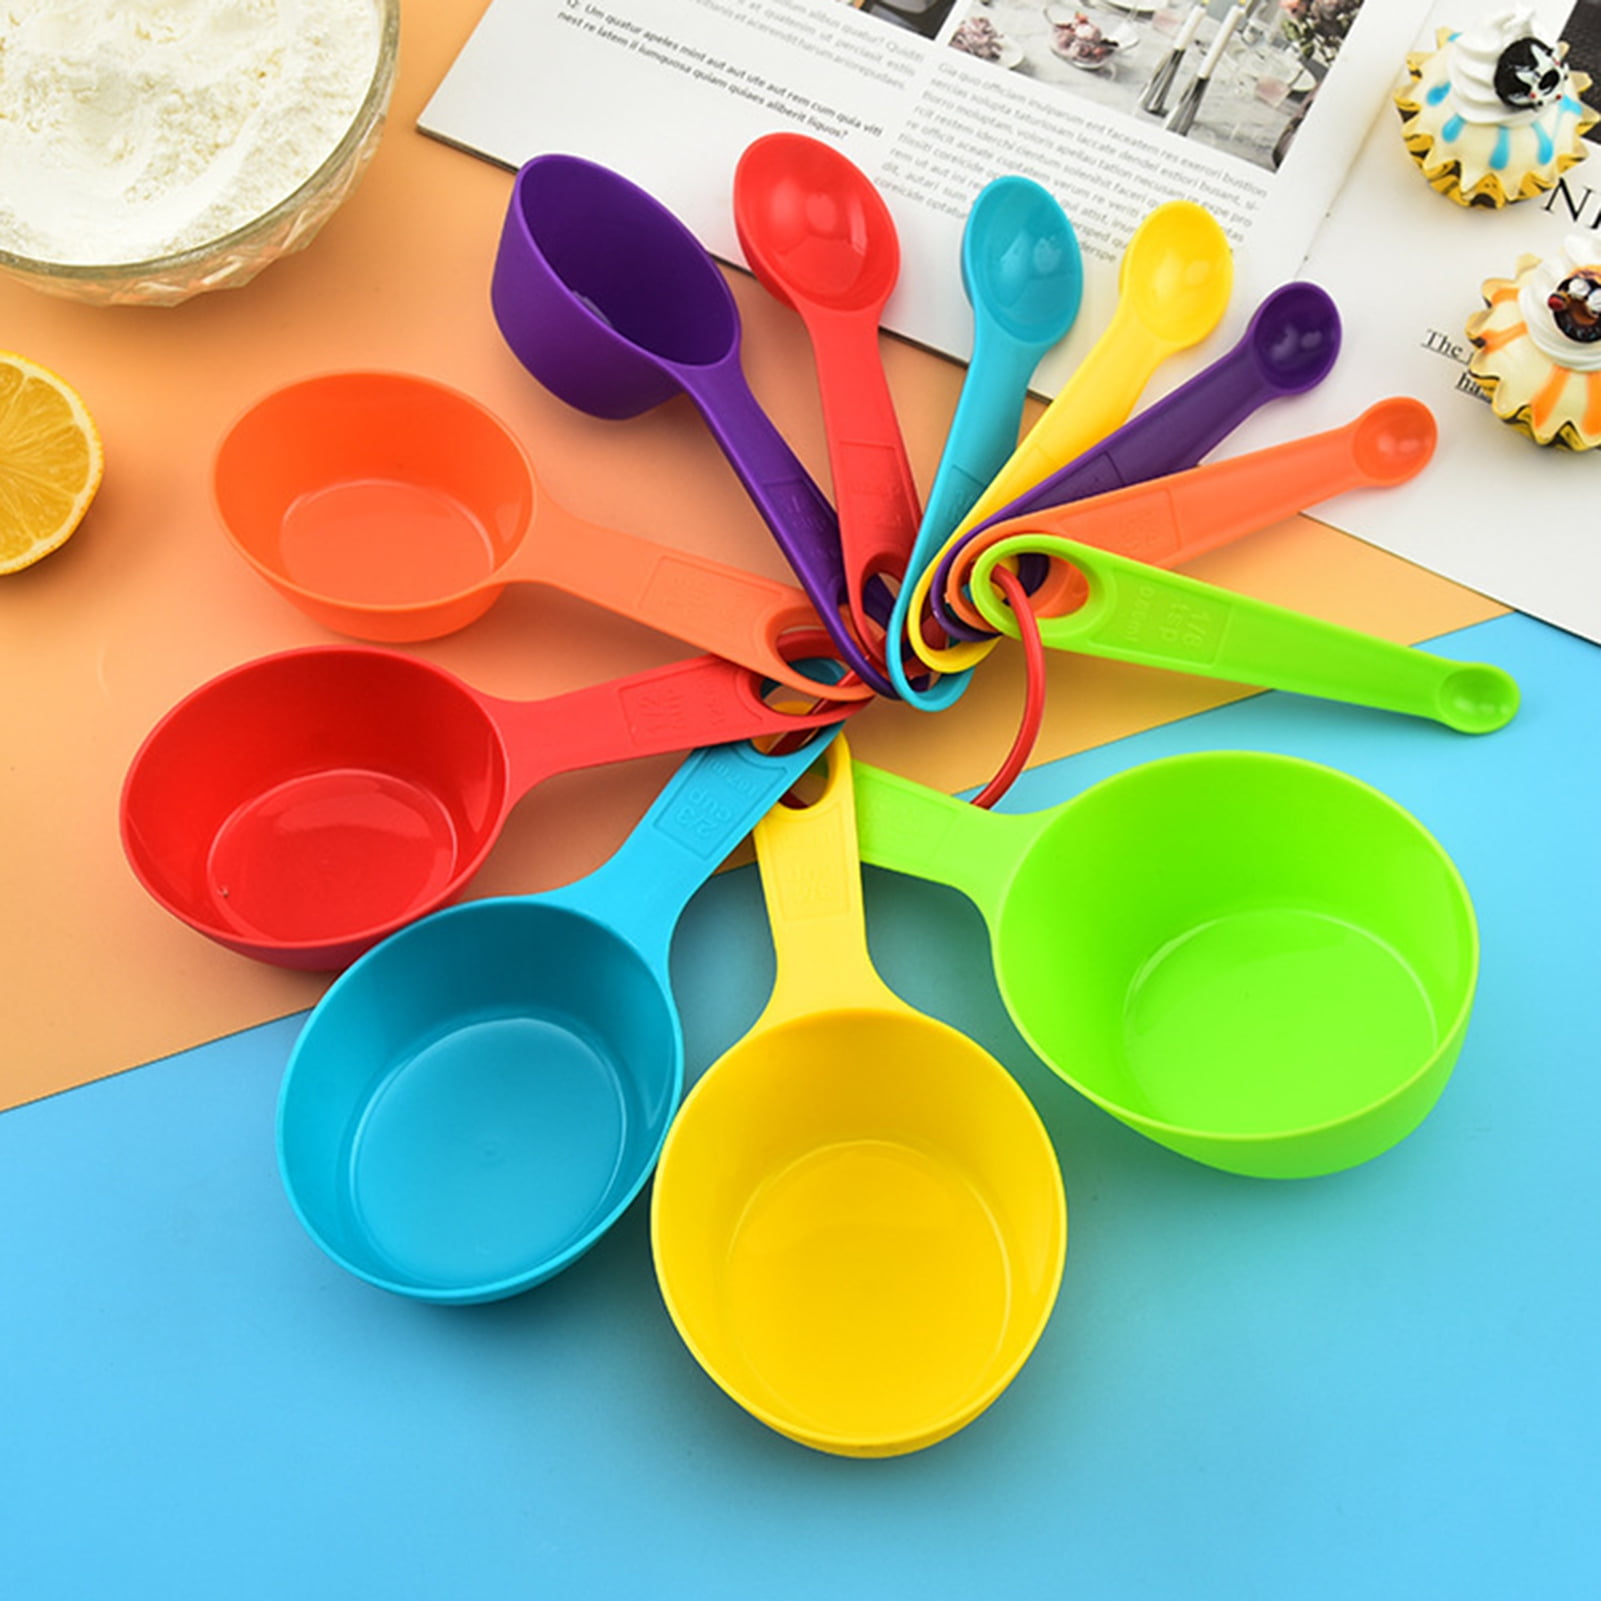 Leking 9pcs Plastic Measuring Cups And Spoons Set For Baking And Diy  Cooking, Kitchen Measuring Spoons With Volume Scale (random Color)